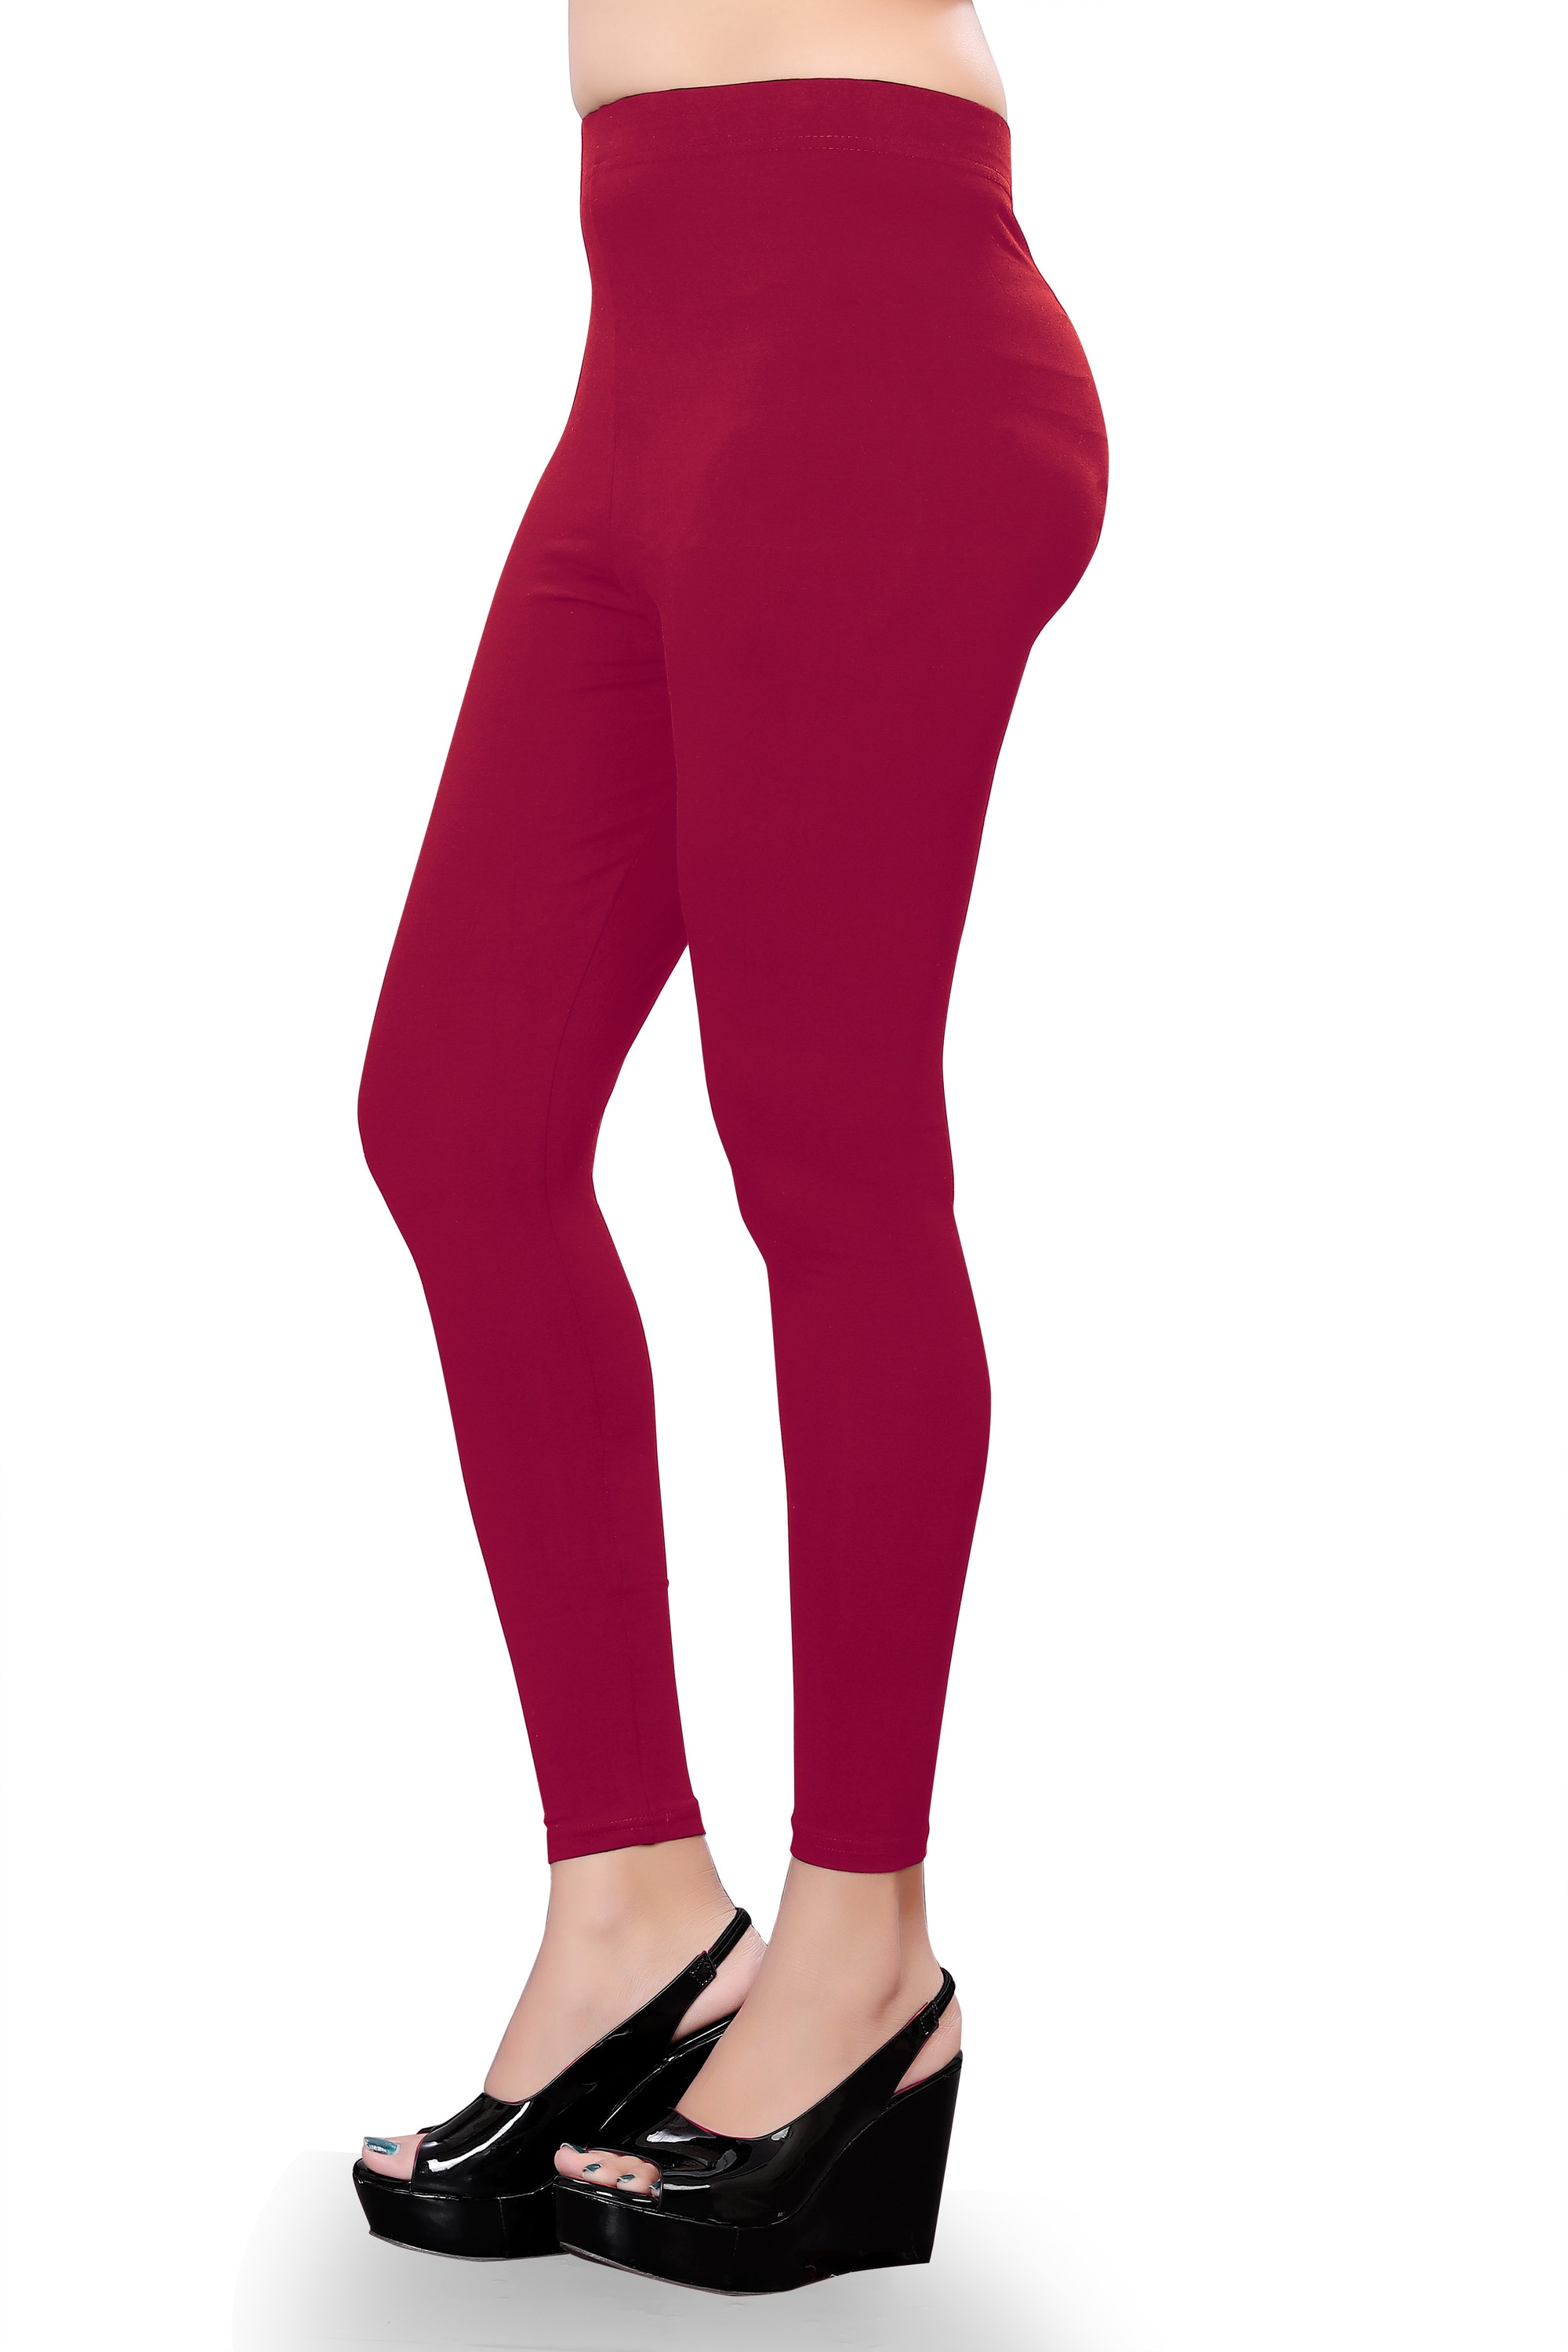 Aaritra Fashion 4 Way Lycra Ankle Length Leggings - Red